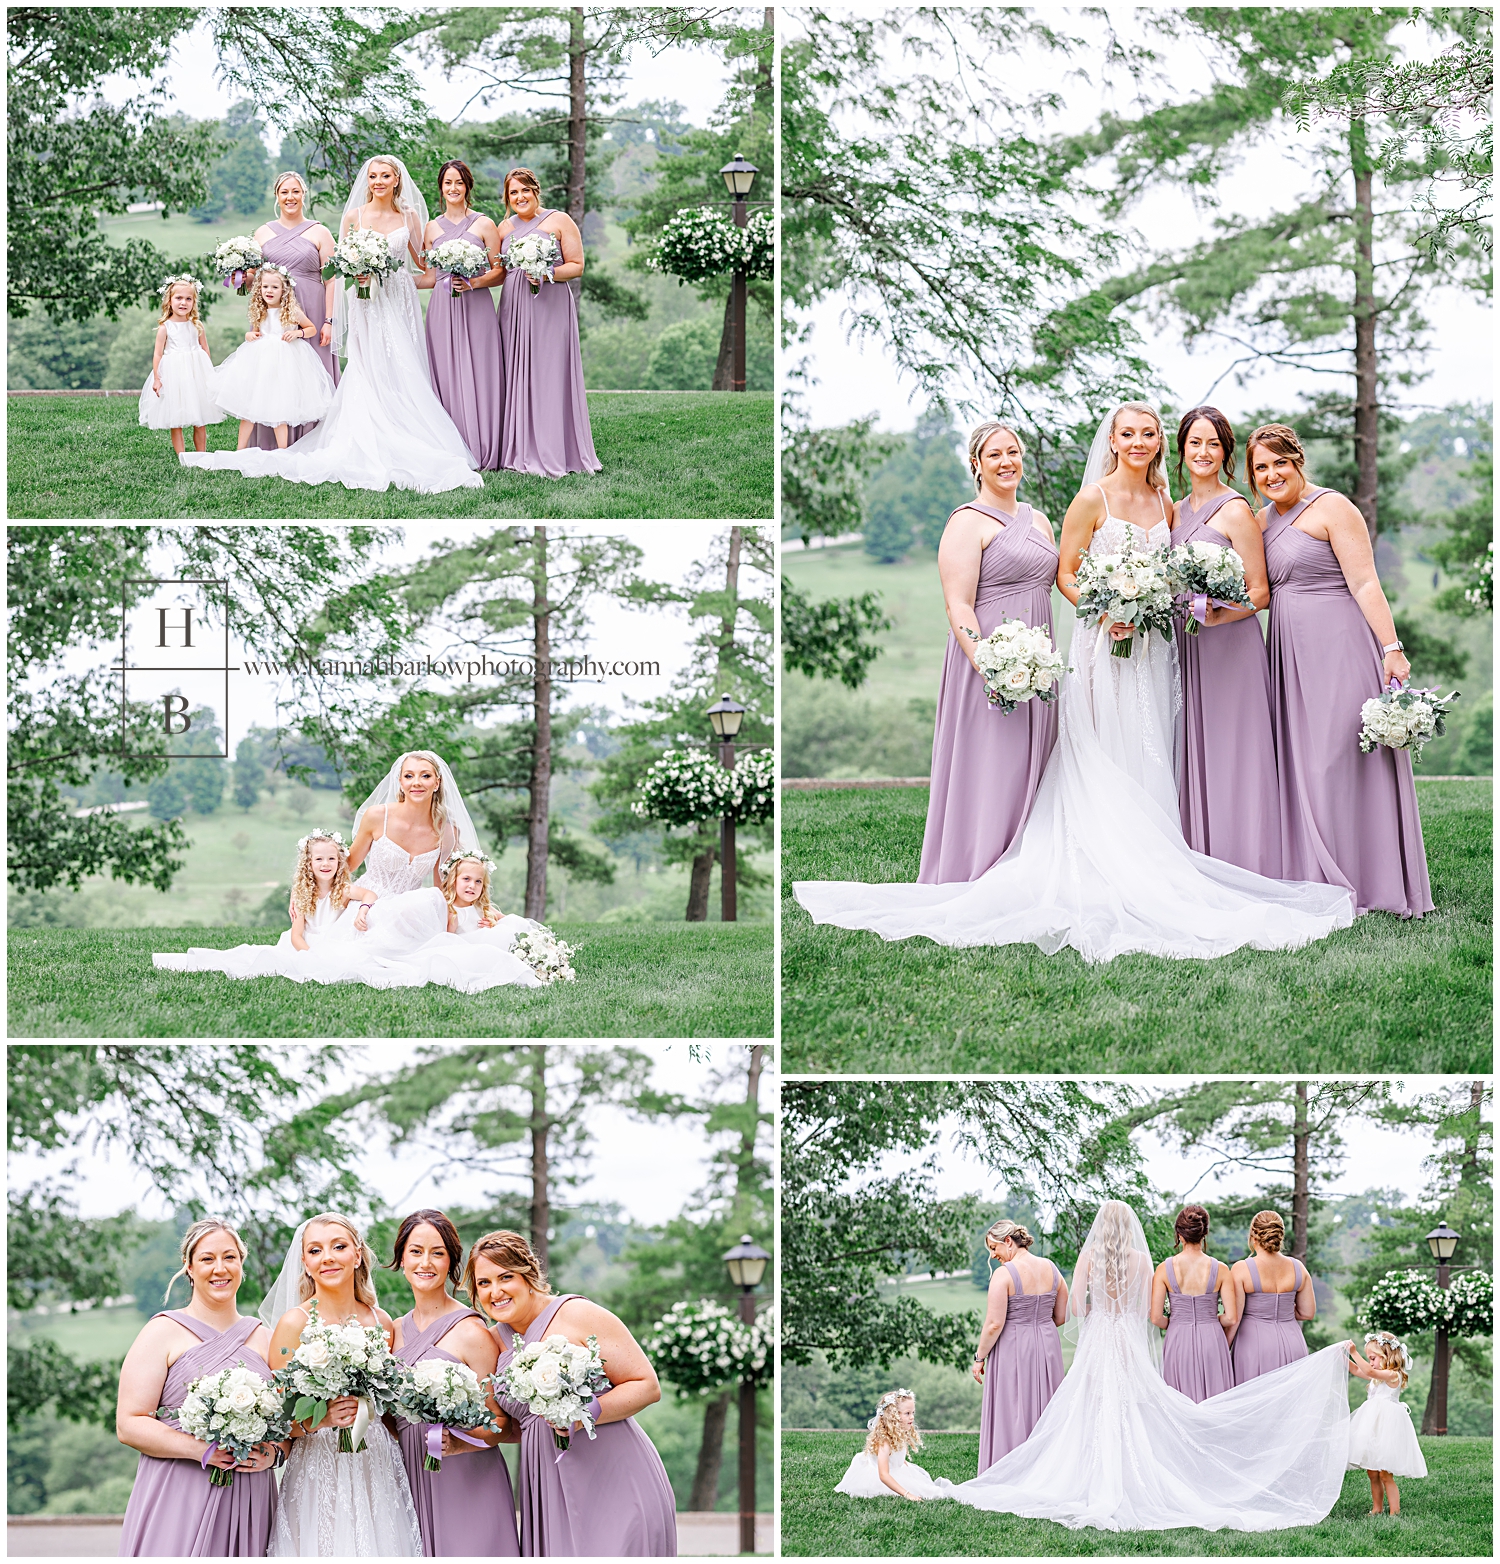 Bridesmaids in subtle lavender dresses pose with bride and flower girls.